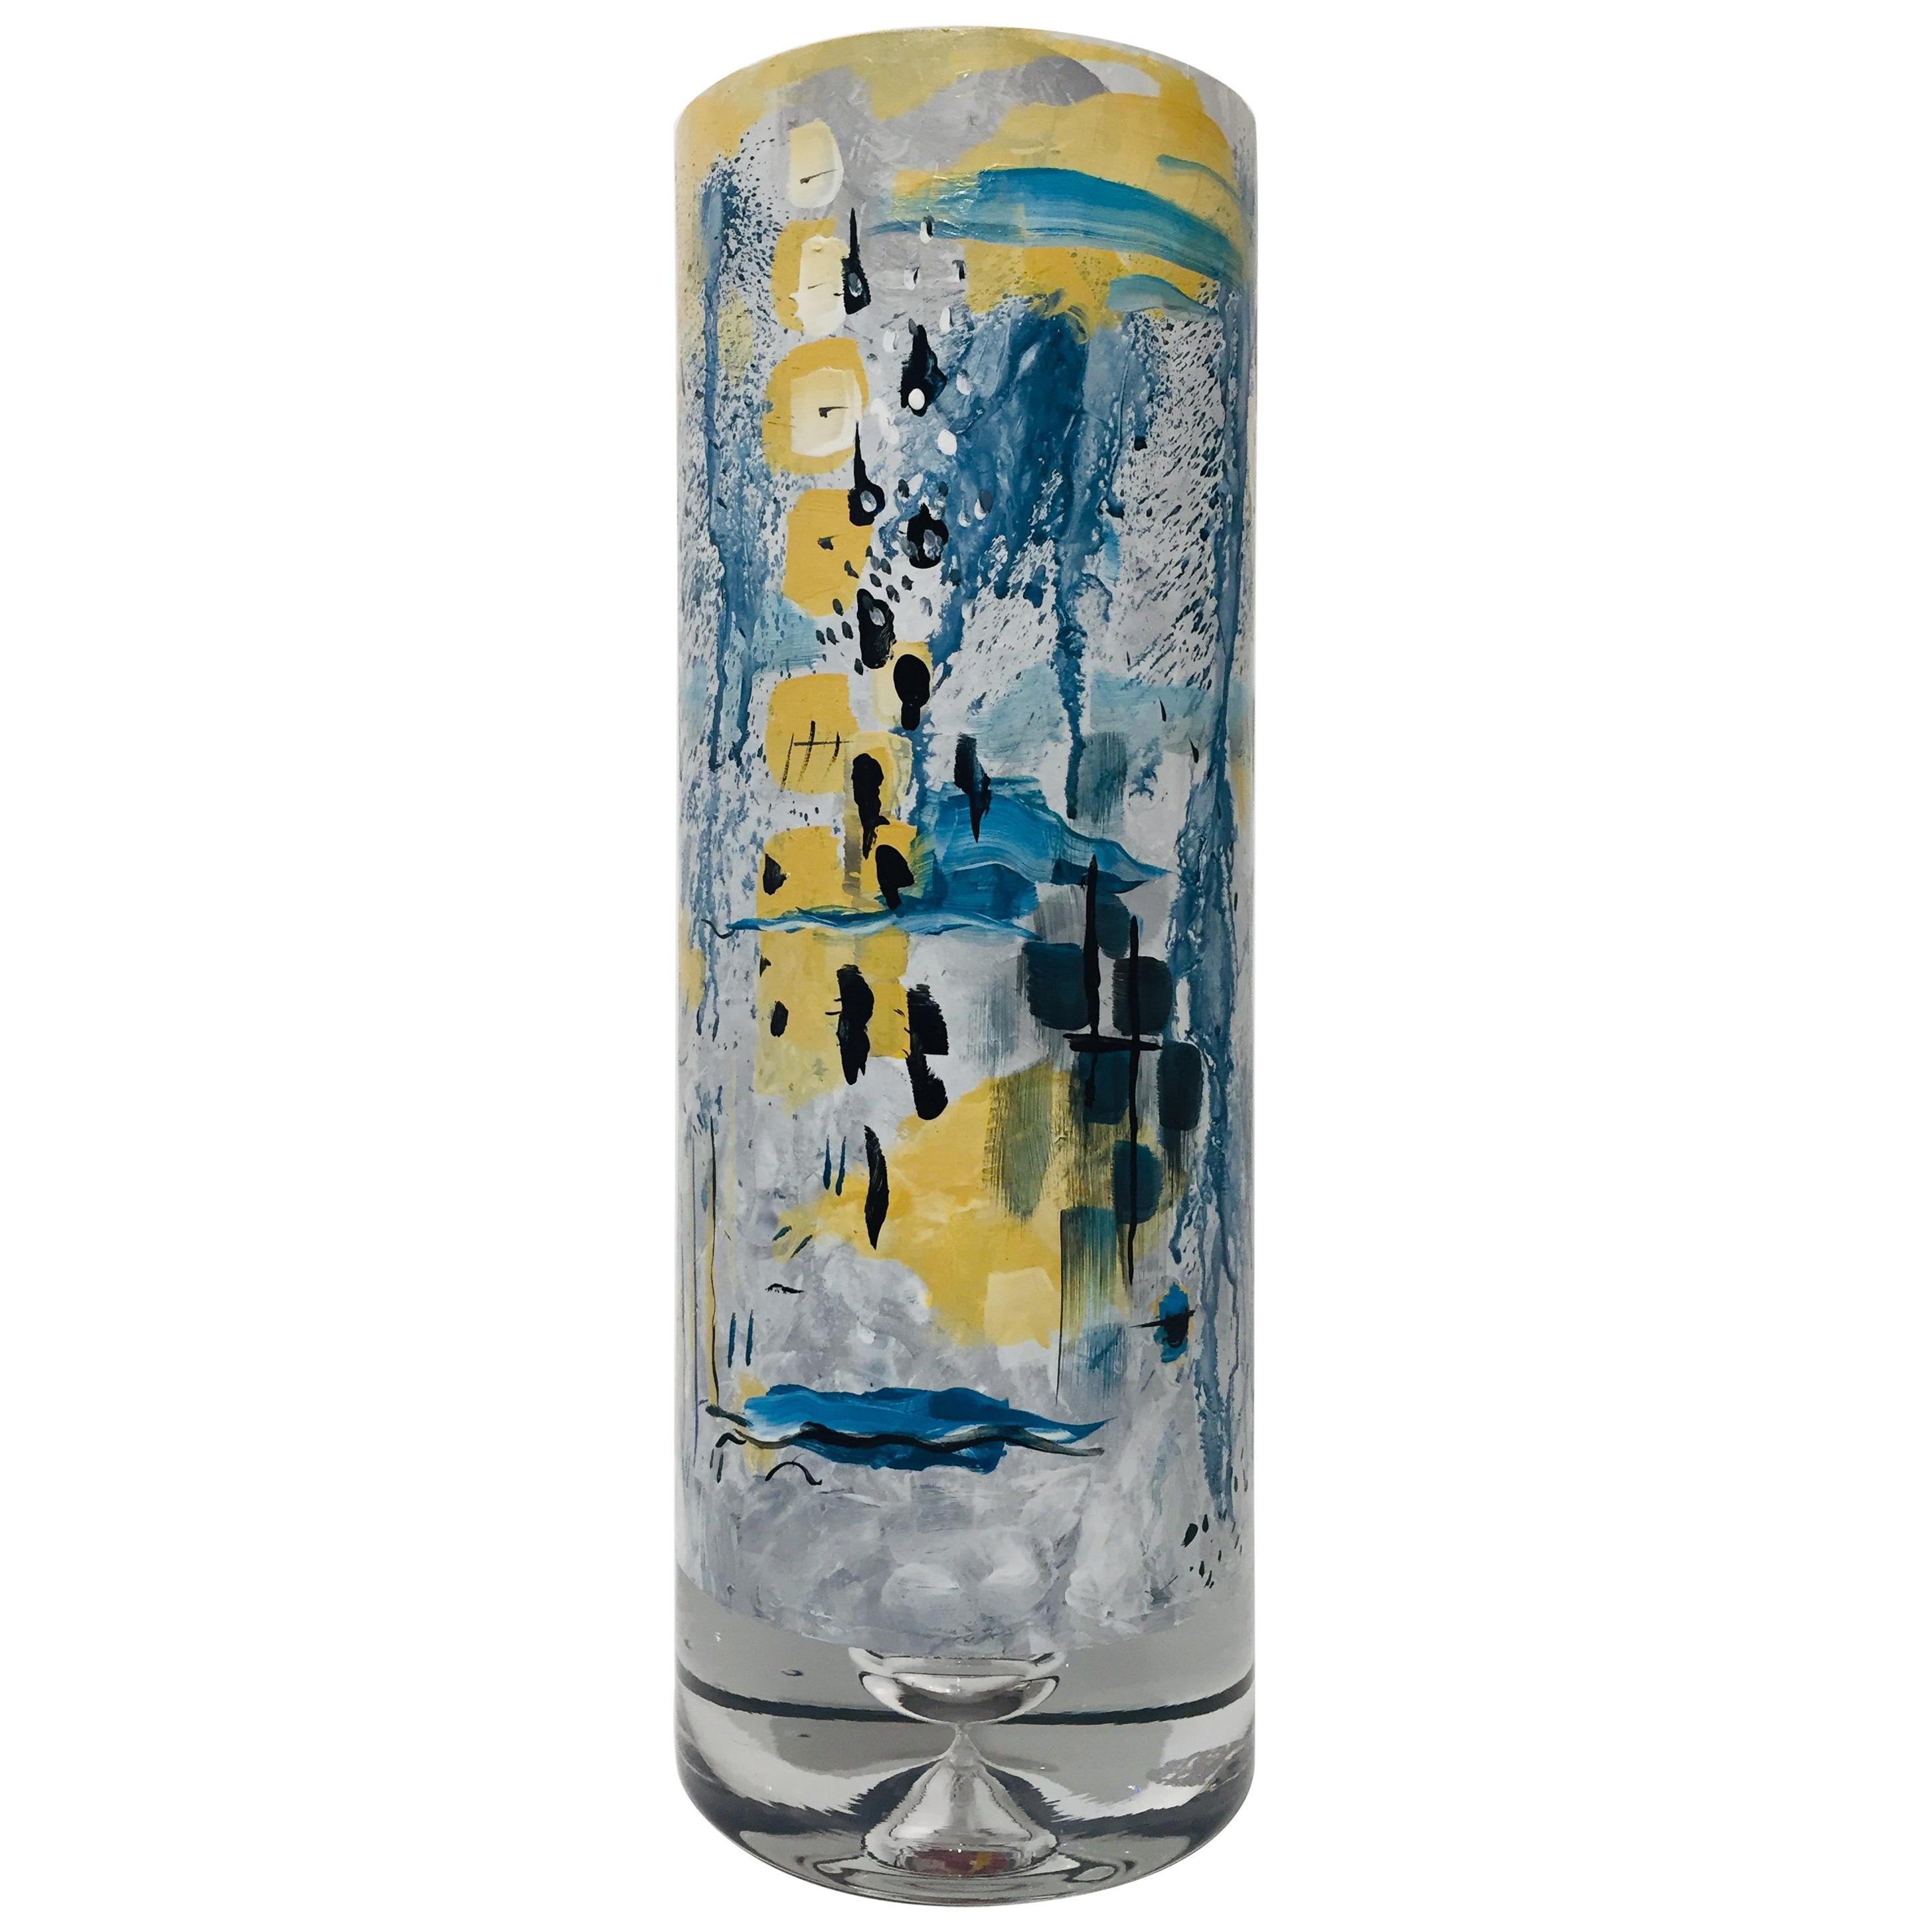 2019 Hand Painted Glass Gray Vase by Kathleen Kane-Murrell (No. 4) For Sale